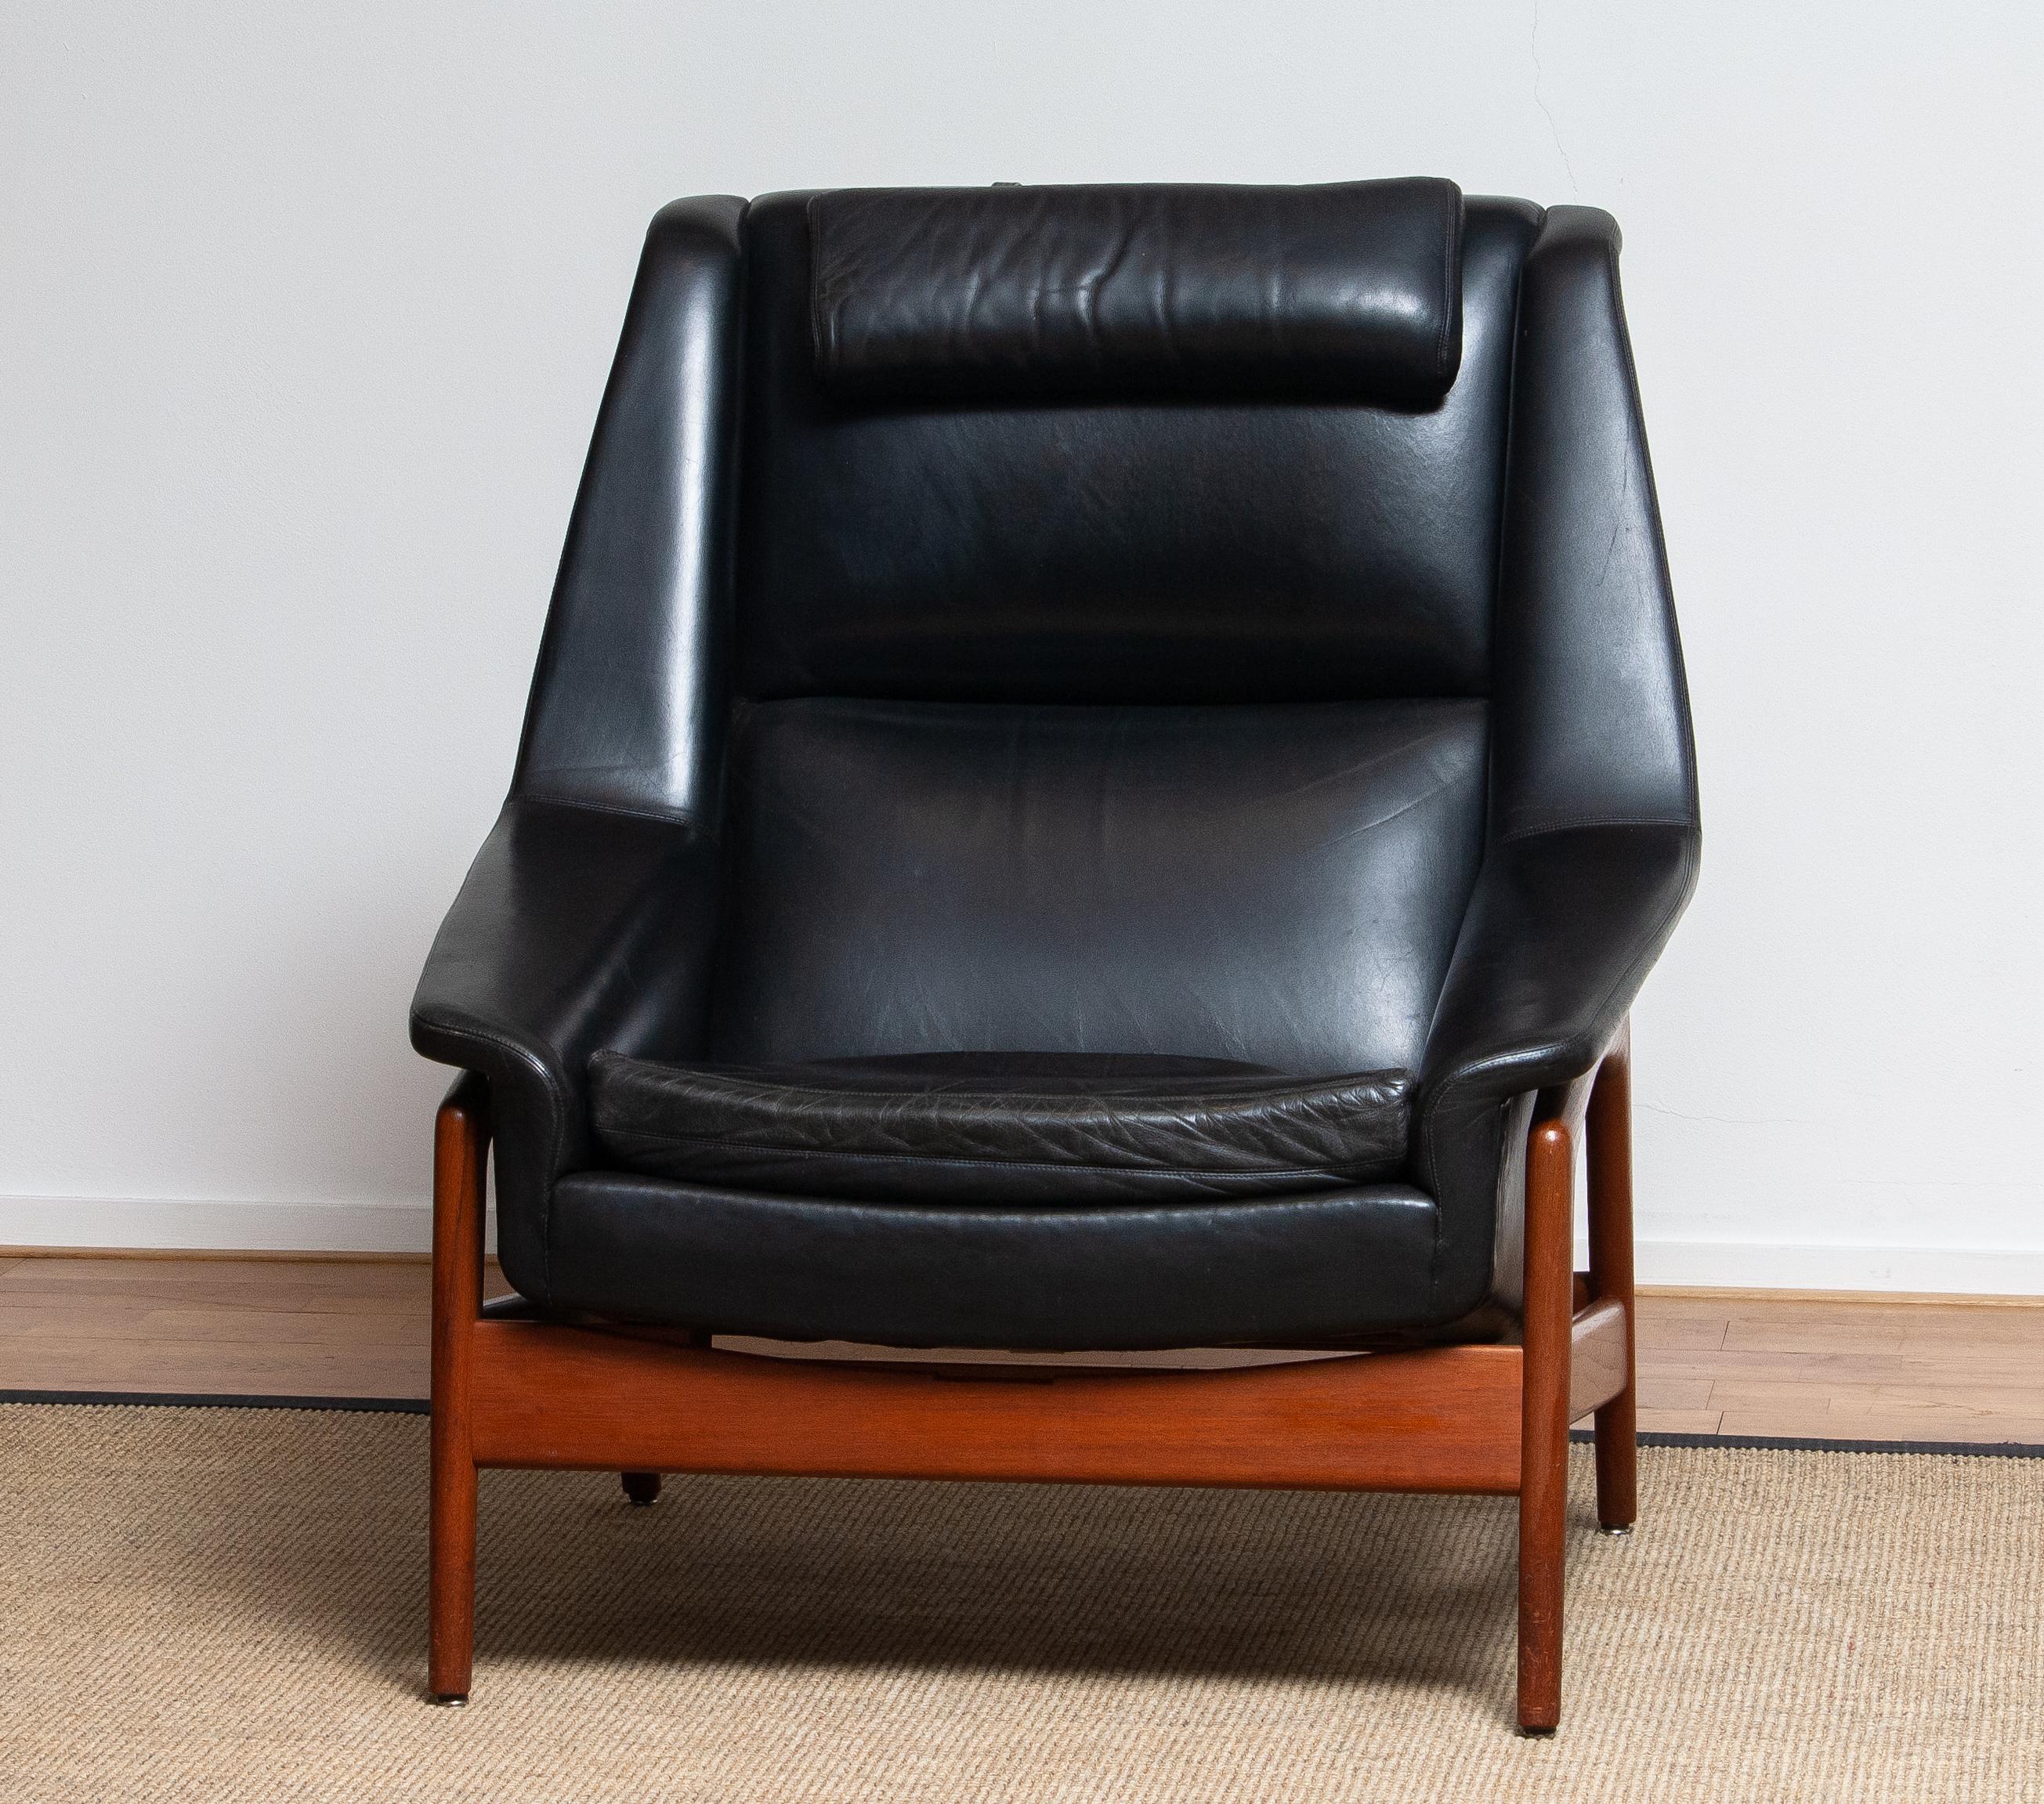 1960s, Lounge Chair 'Profil' by Folke Ohlsson for DUX in Black Leather and Teak 7